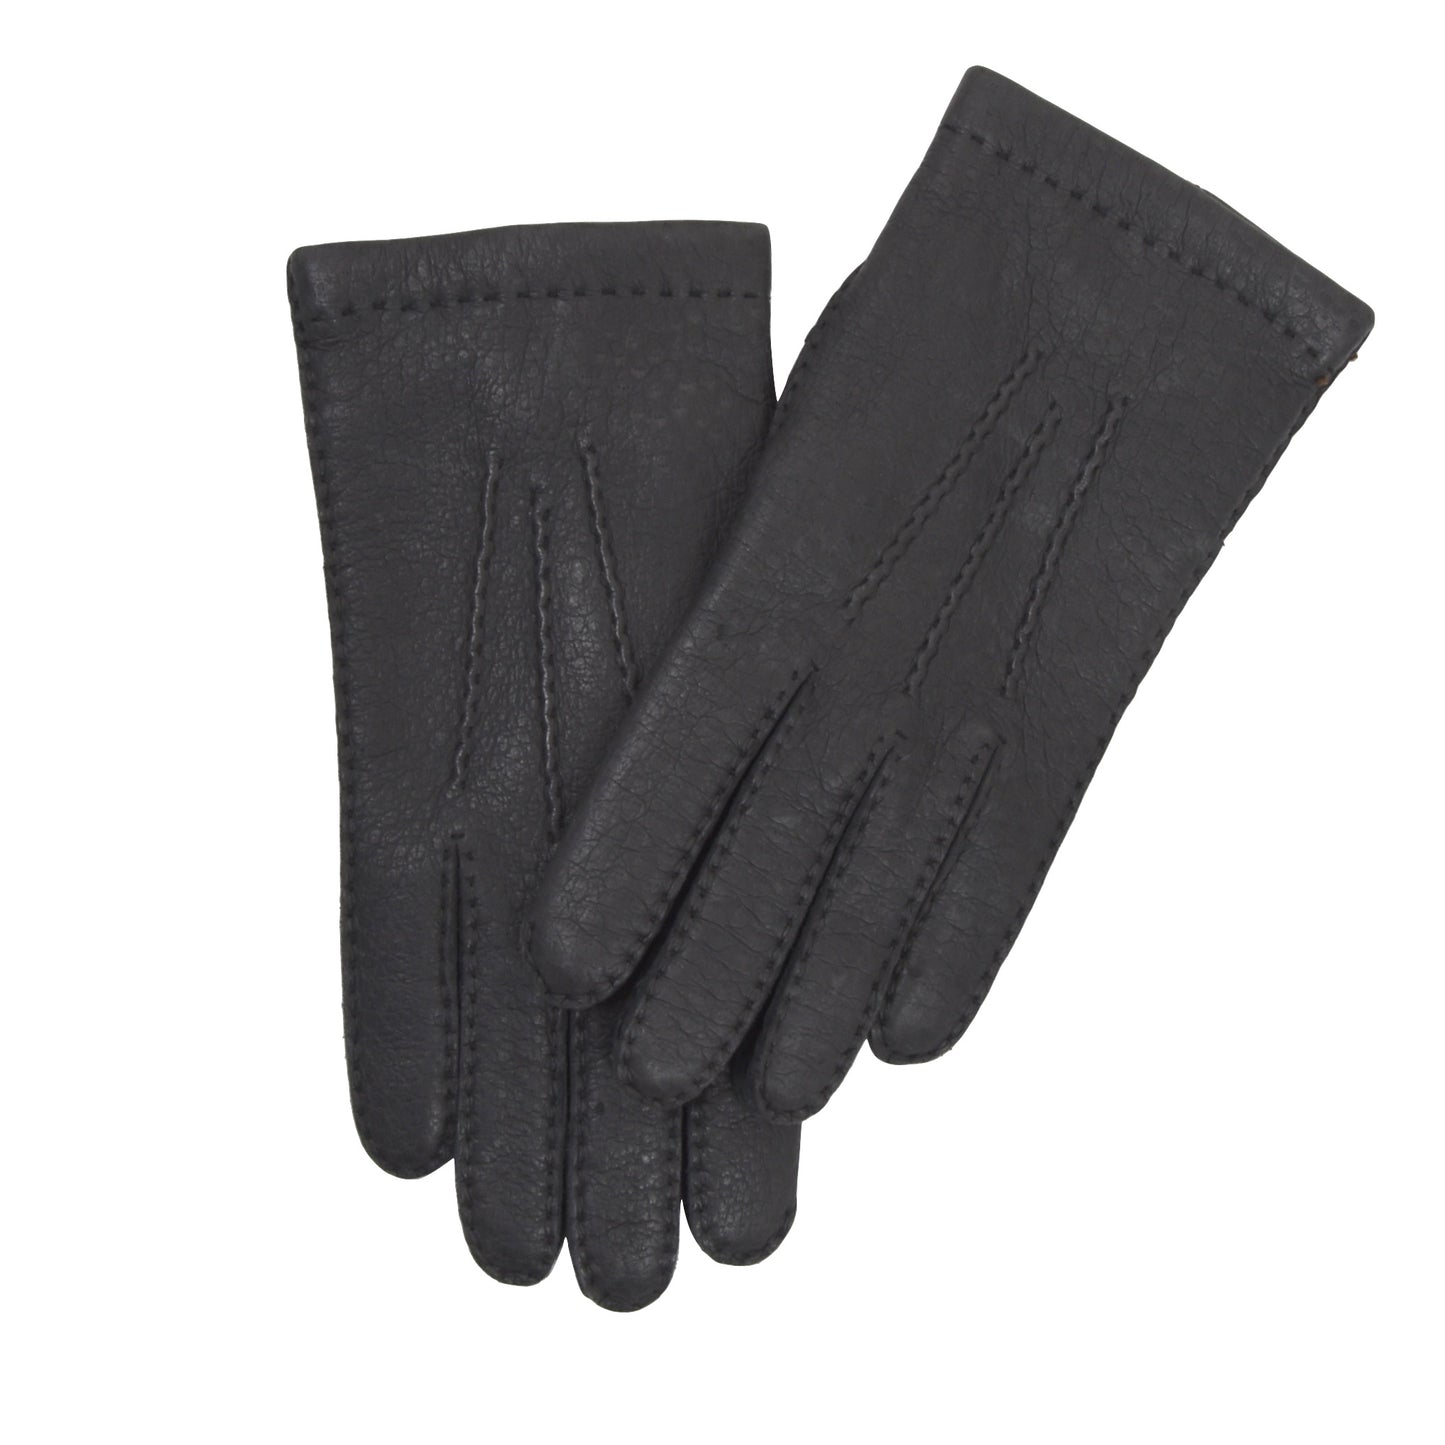 Lined Peccary Leather Gloves Size 8.5 - Charcoal/Dark Grey